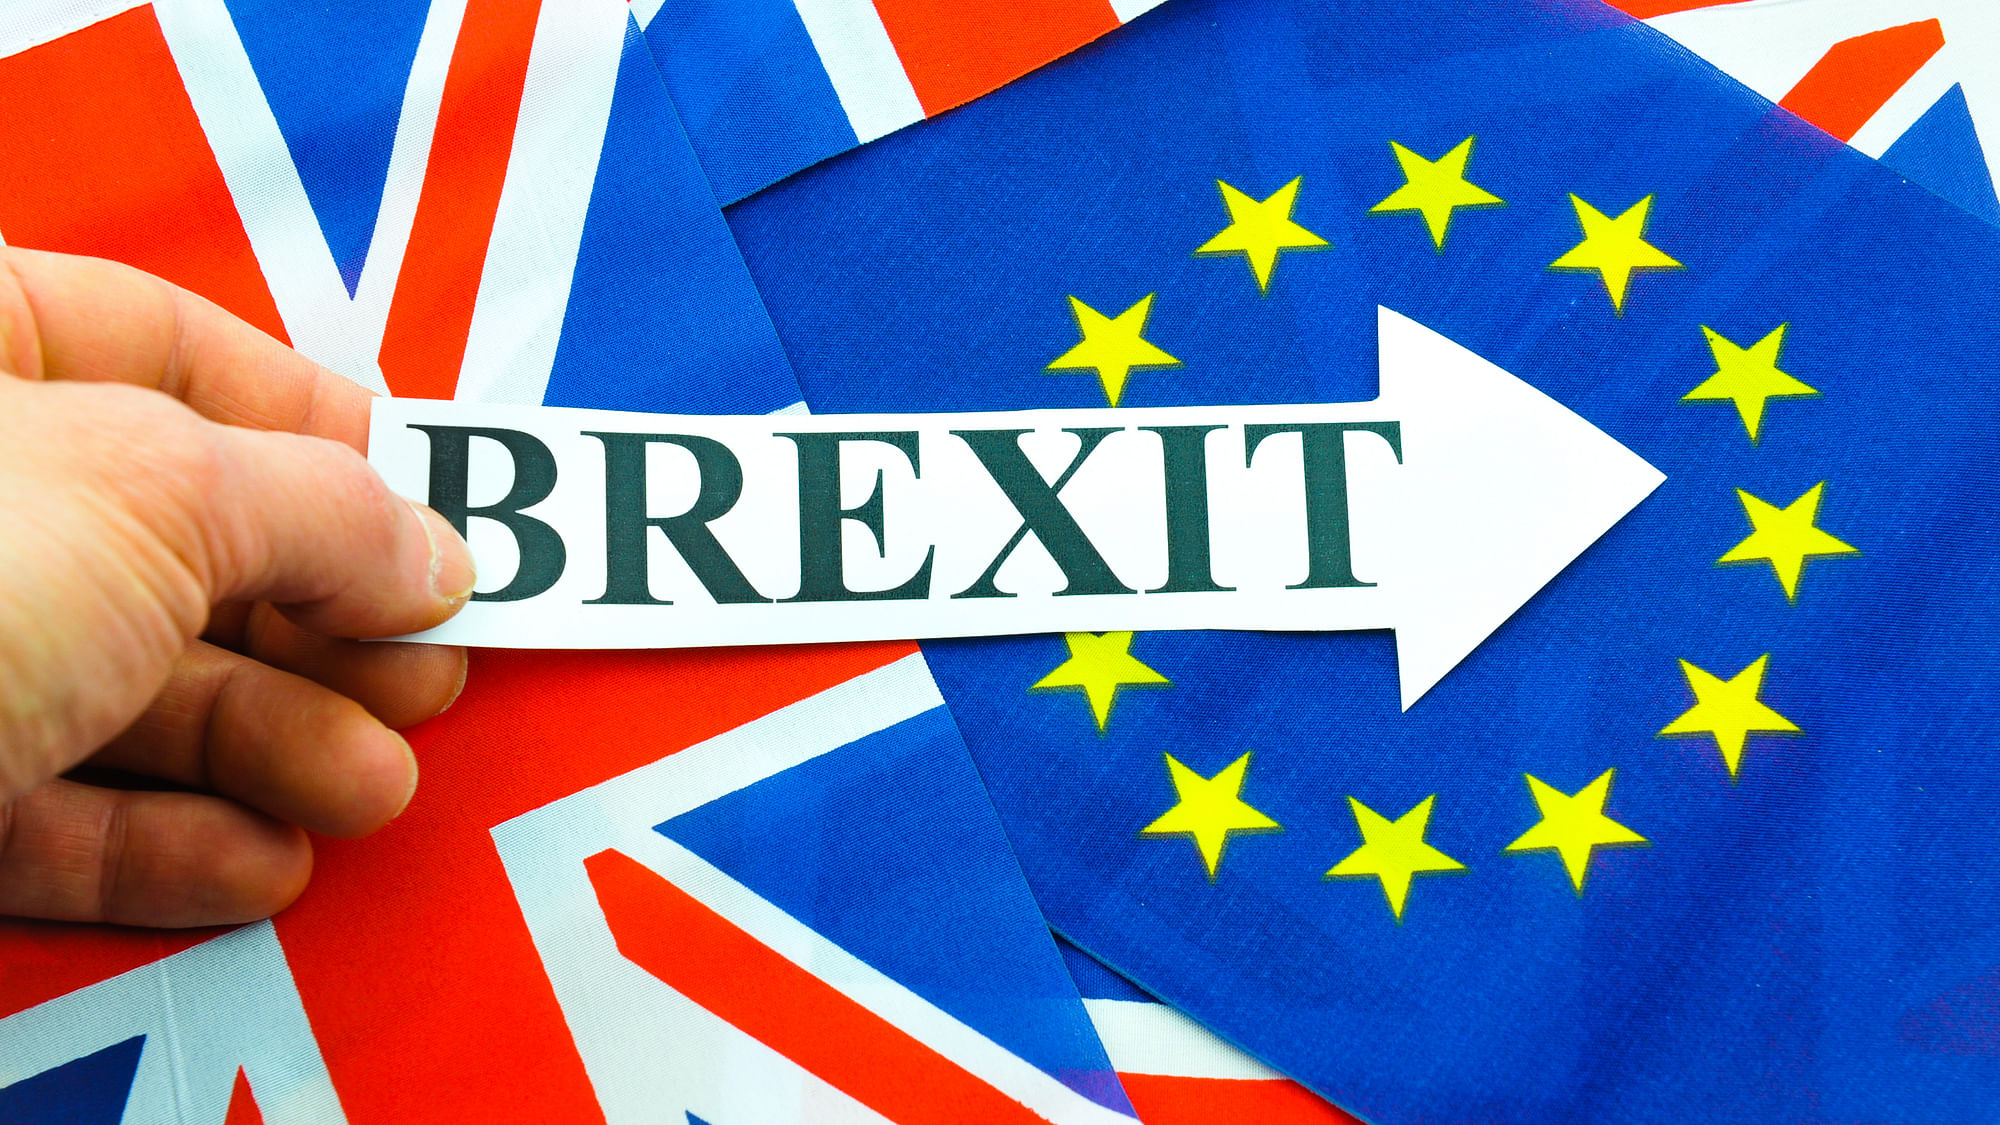 

Britain has triggered Article 50, which begins the process of its exit from the European Union. (Photo: iStockphoto)